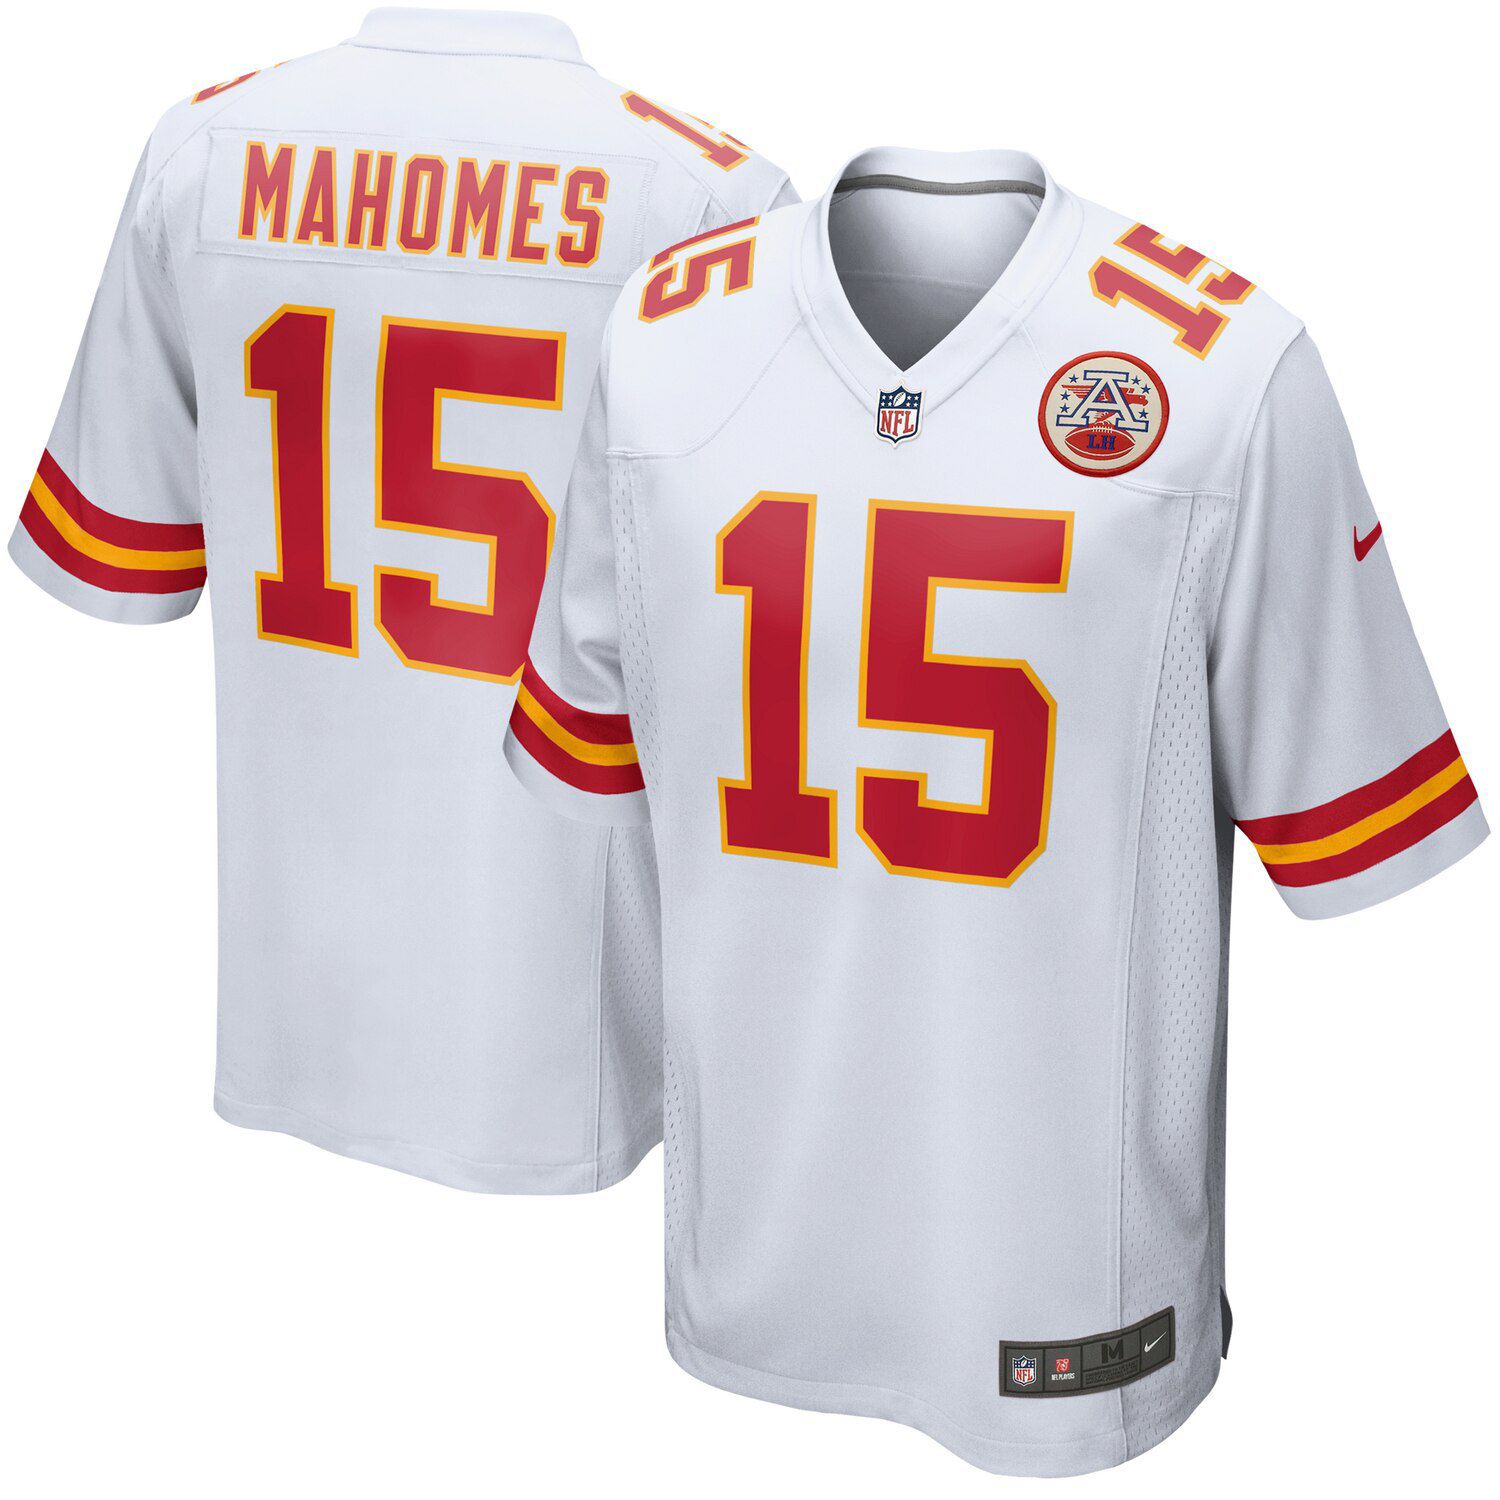 patrick mahomes jersey for kids